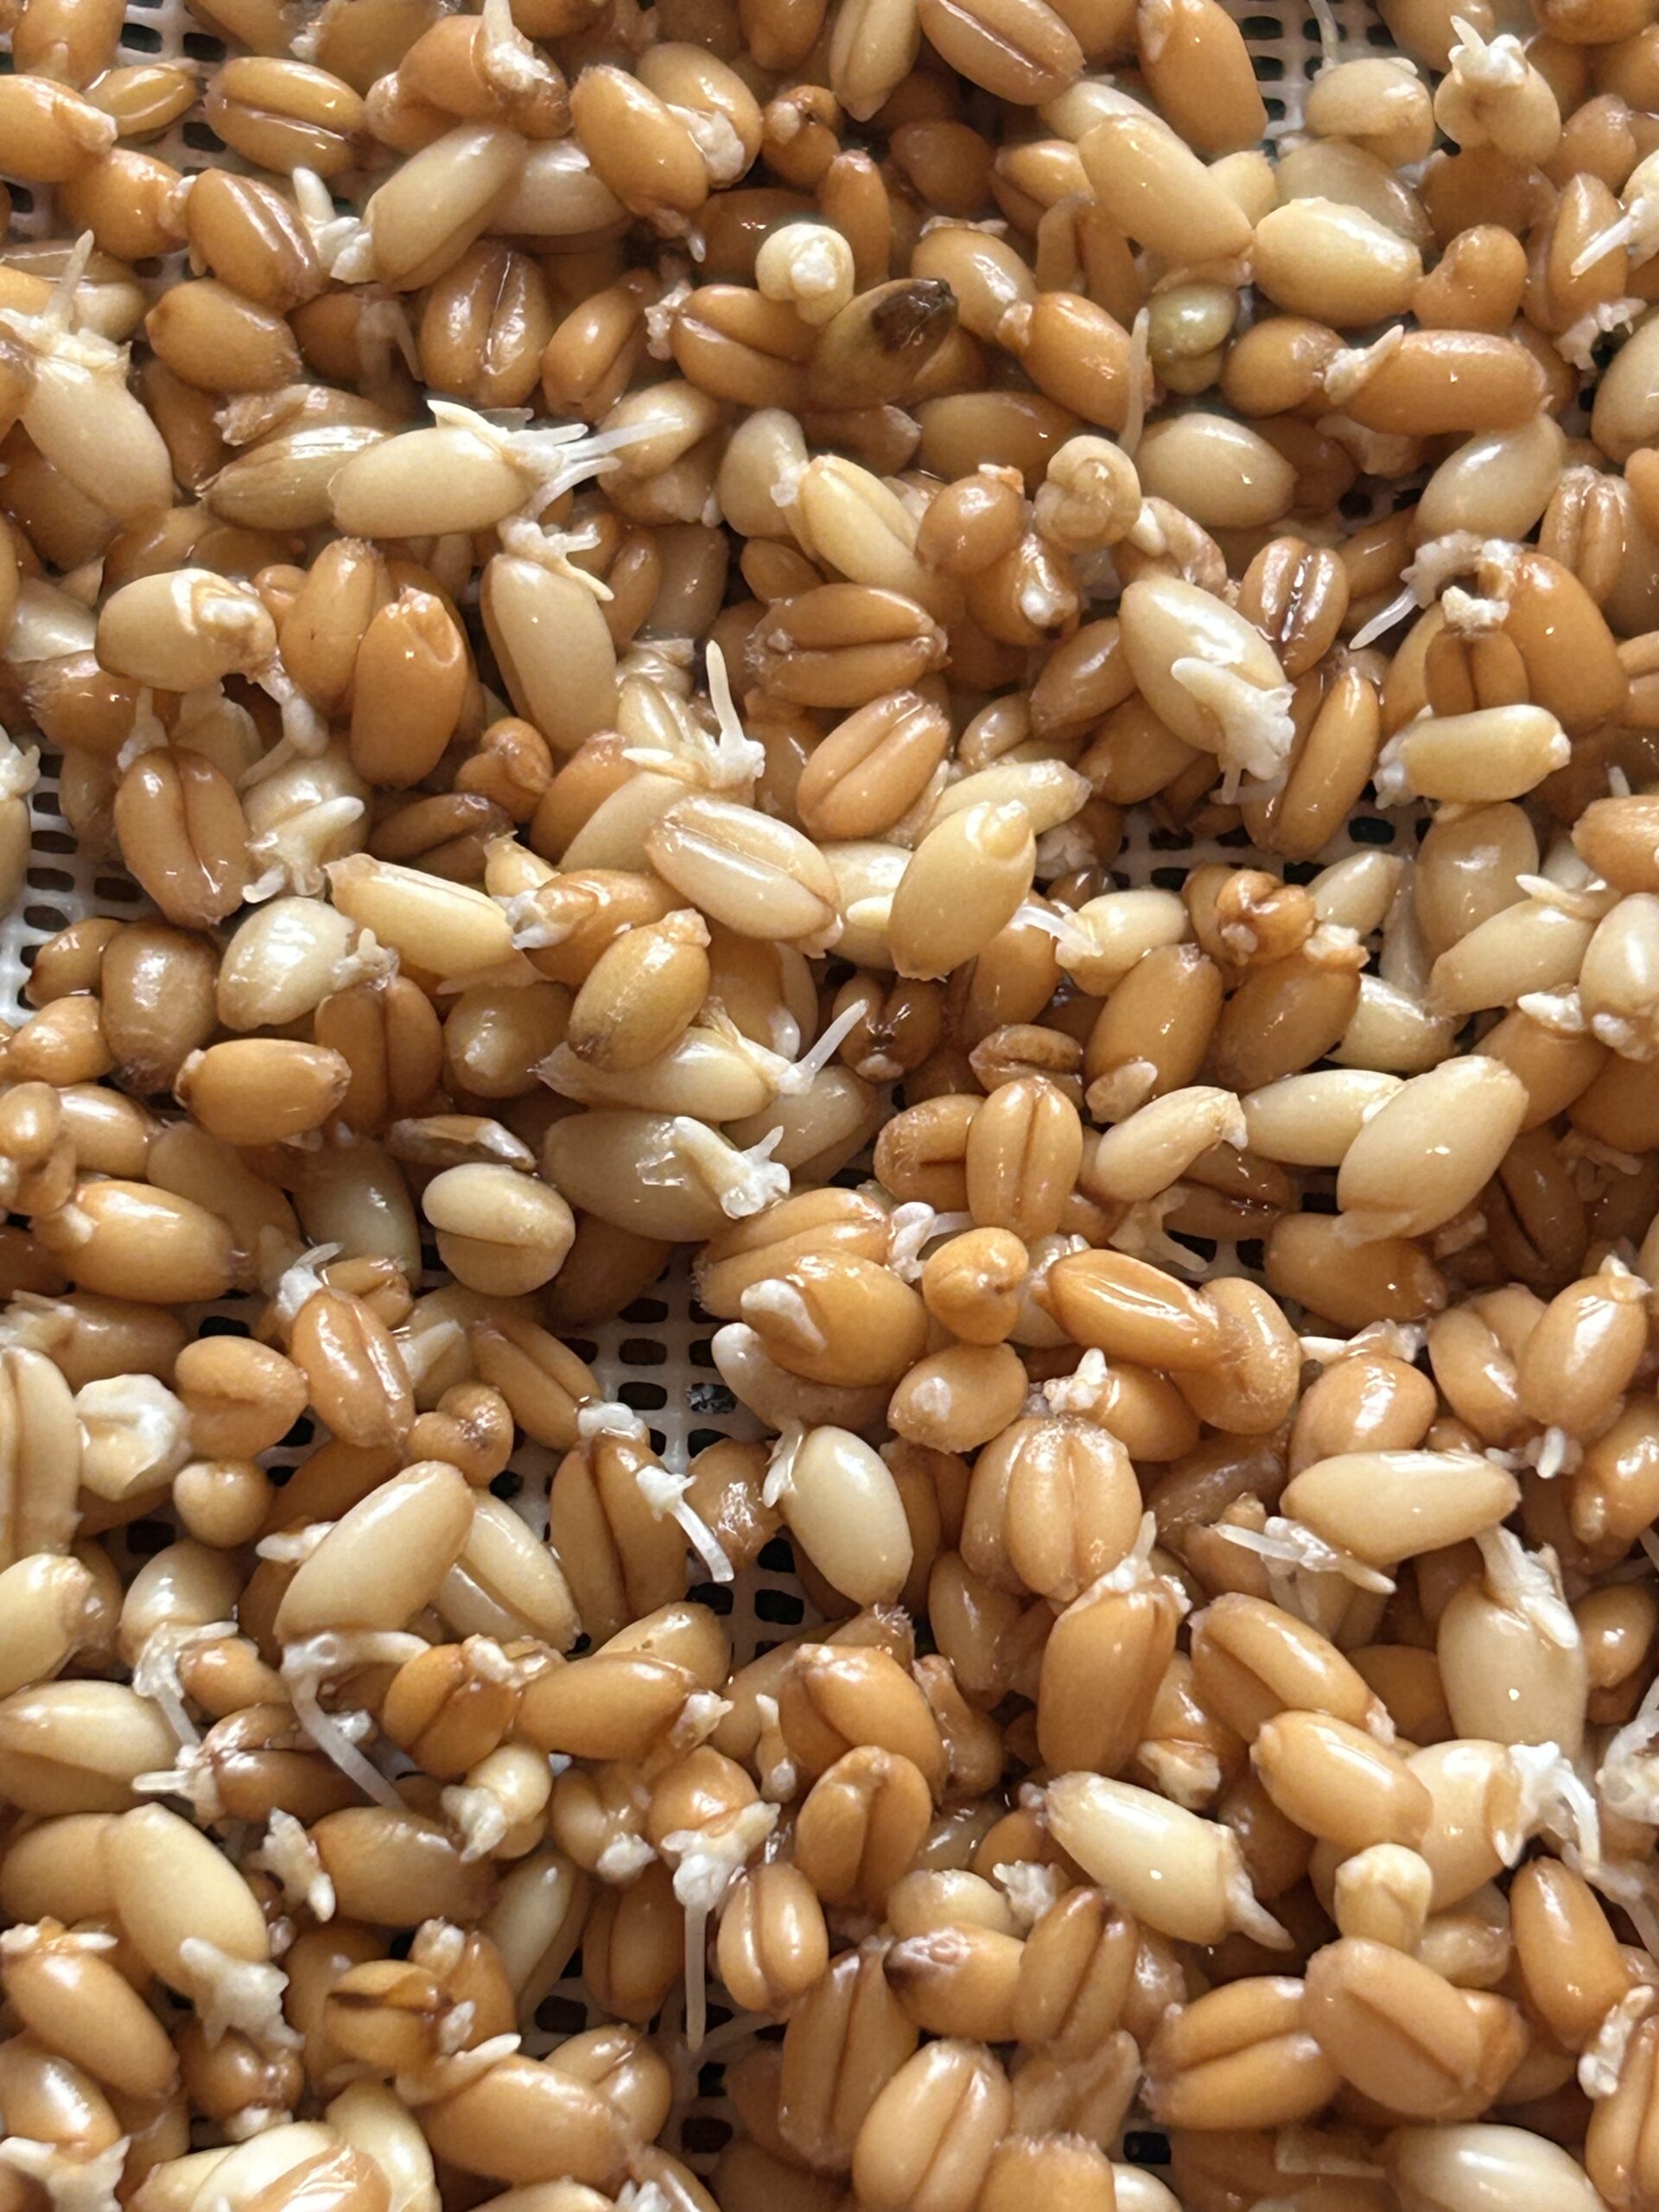 How to Sprout Grains for Bread: 100% Sprouted Wheat Bread